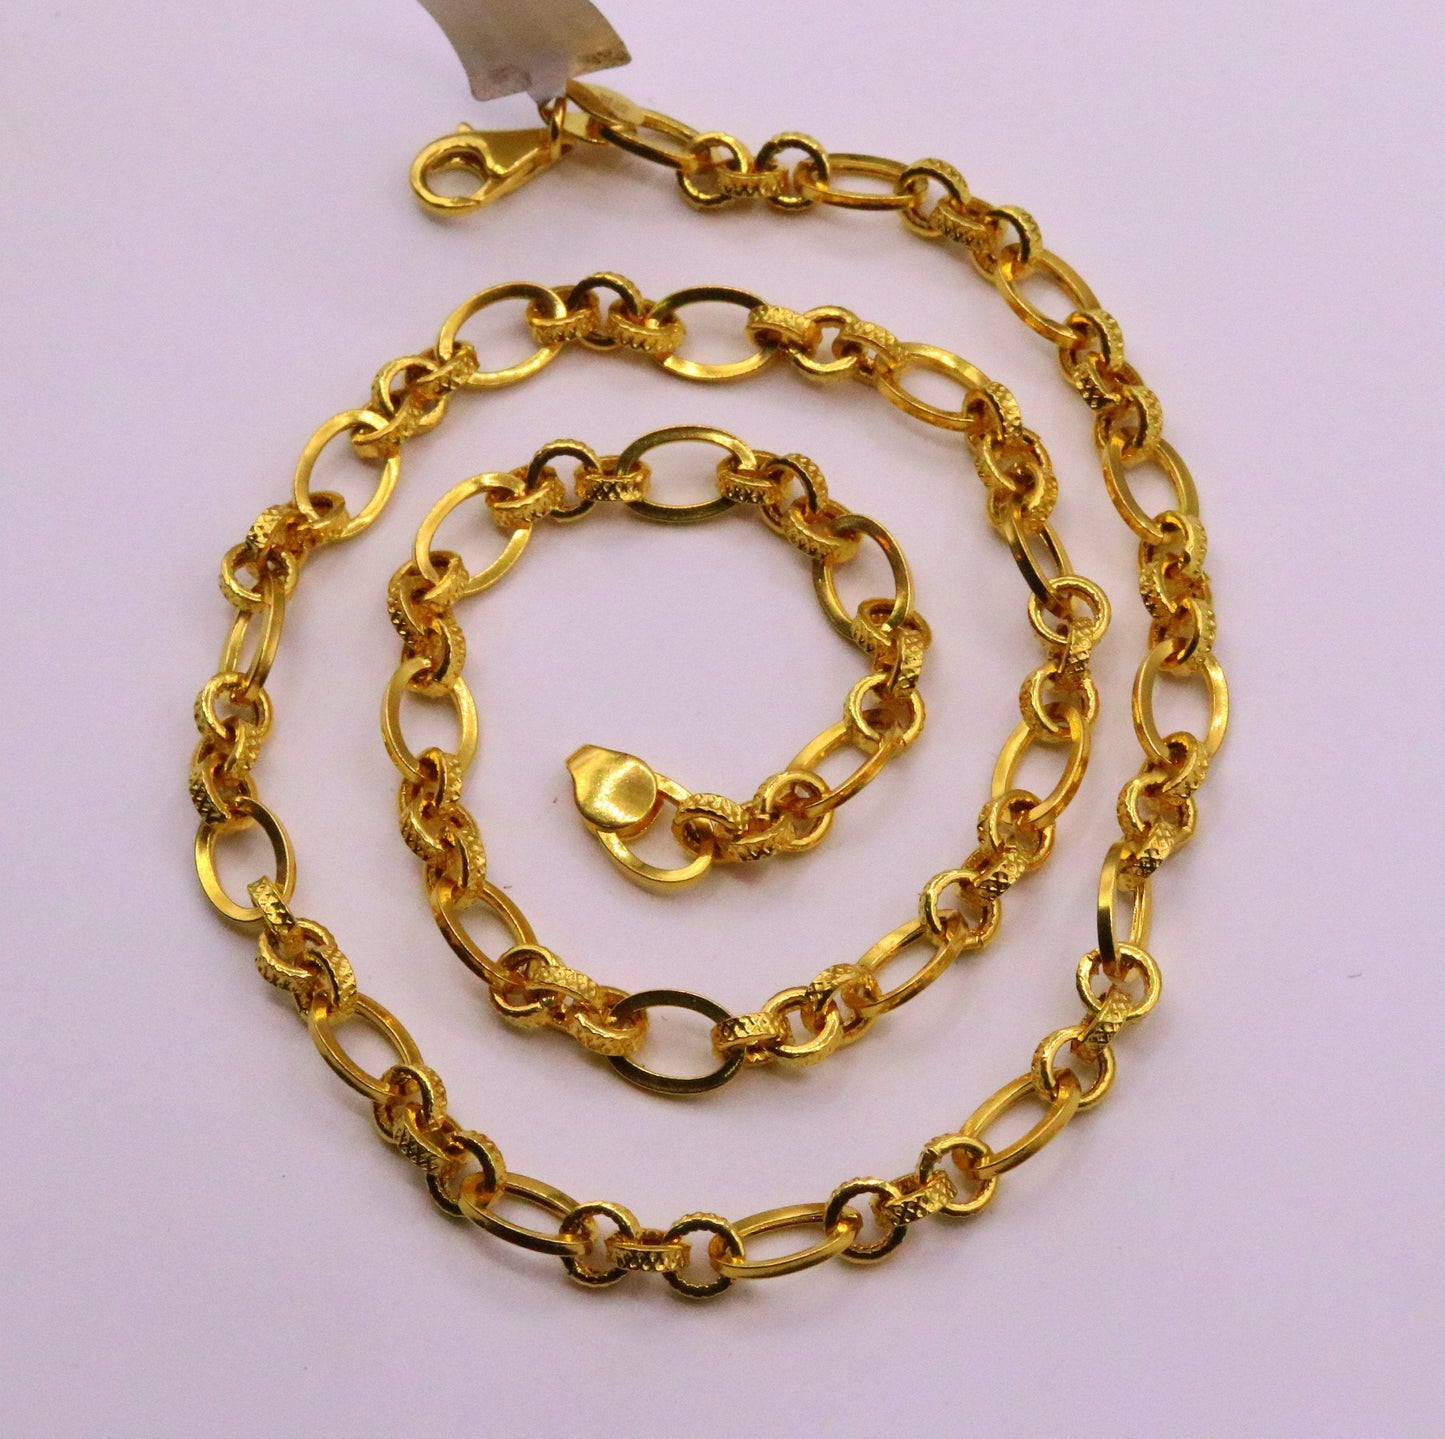 20 inches handcrafted gorgeous link chain necklace 22karat yellow gold dot link chain antique stylish india jewelry ch178 - TRIBAL ORNAMENTS